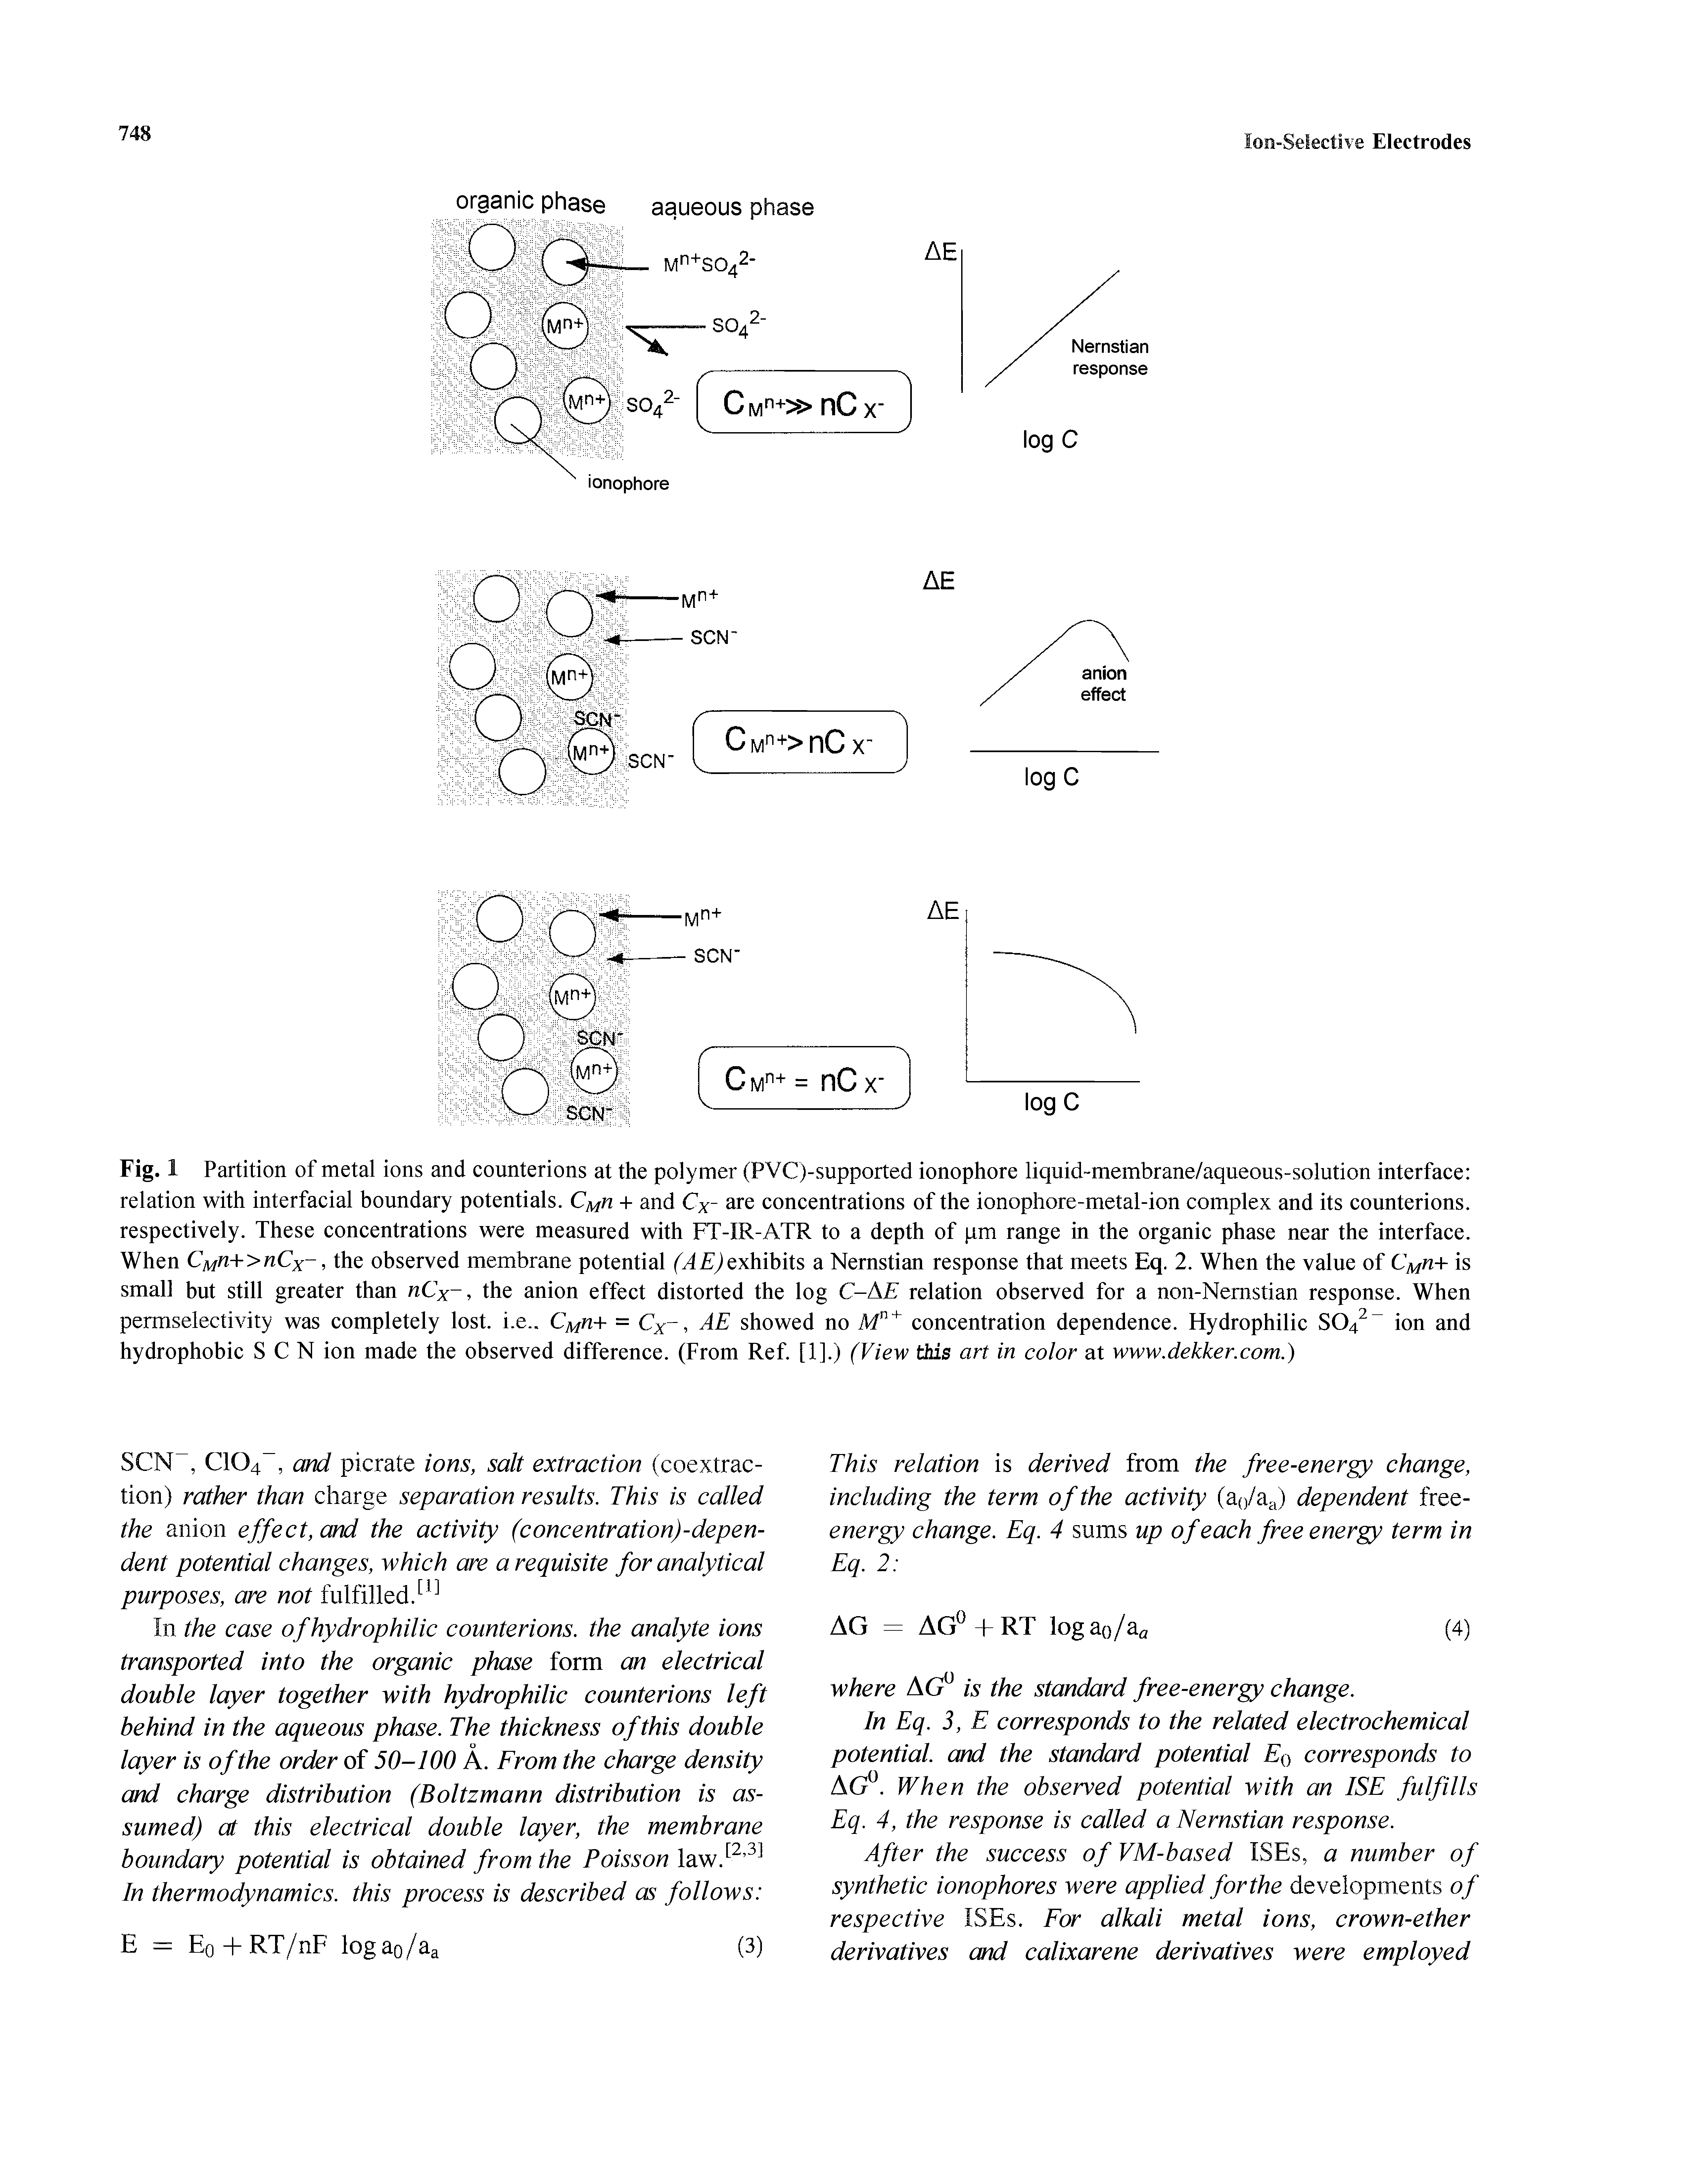 Fig. 1 Partition of metal ions and counterions at the polymer (PVC)-supported ionophore liquid-membrane/aqueous-solution interface relation with interfacial boundary potentials. C rz + and Cx- are concentrations of the ionophore-metal-ion complex and its counterions, respectively. These concentrations were measured with FT-IR-ATR to a depth of pm range in the organic phase near the interface. When CMn+>nCx, the observed membrane potential f exhibits a Nernstian response that meets Eq. 2. When the value of 11+ is small but still greater than nCx, the anion effect distorted the log C-AE relation observed for a non-Nemstian response. When...